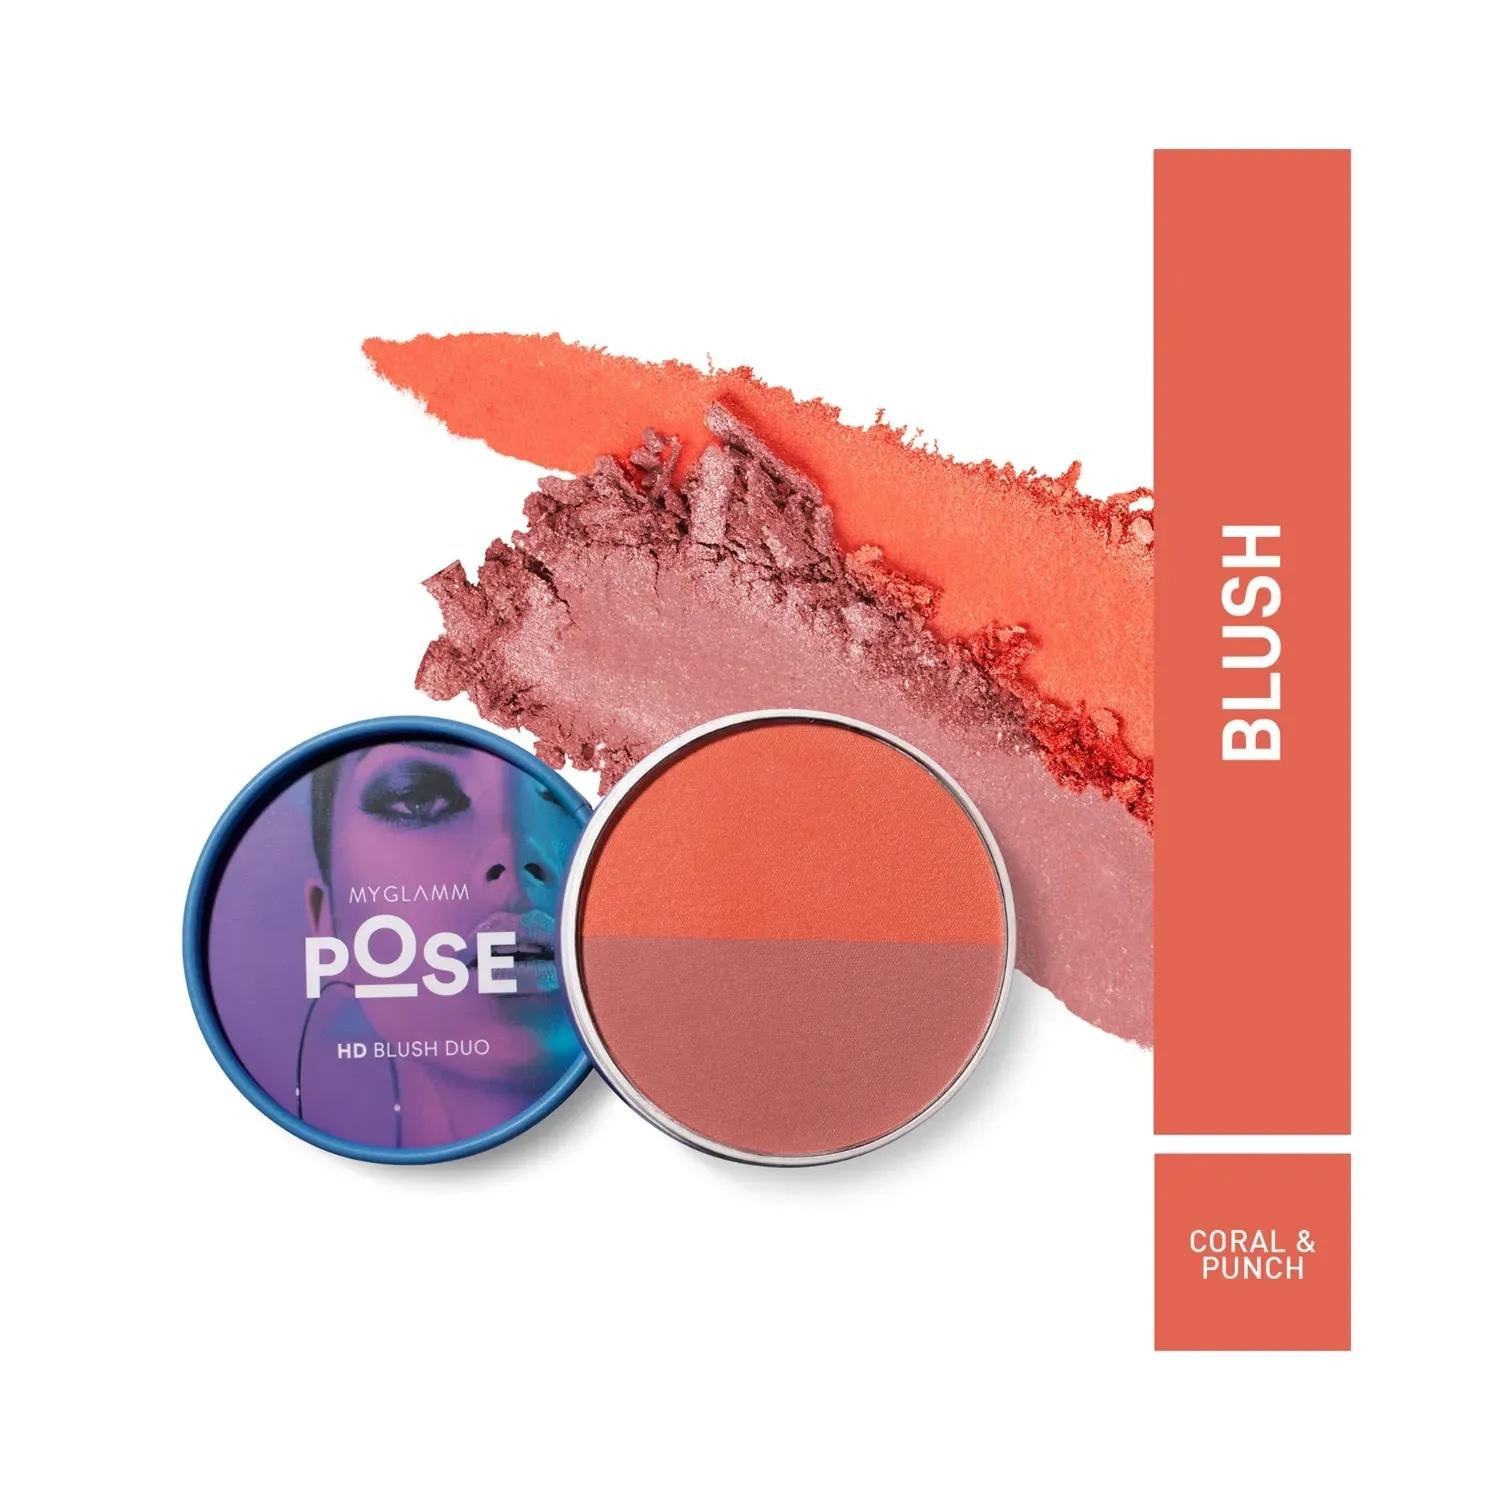 myglamm pose hd blush duo - coral & punch (9g)